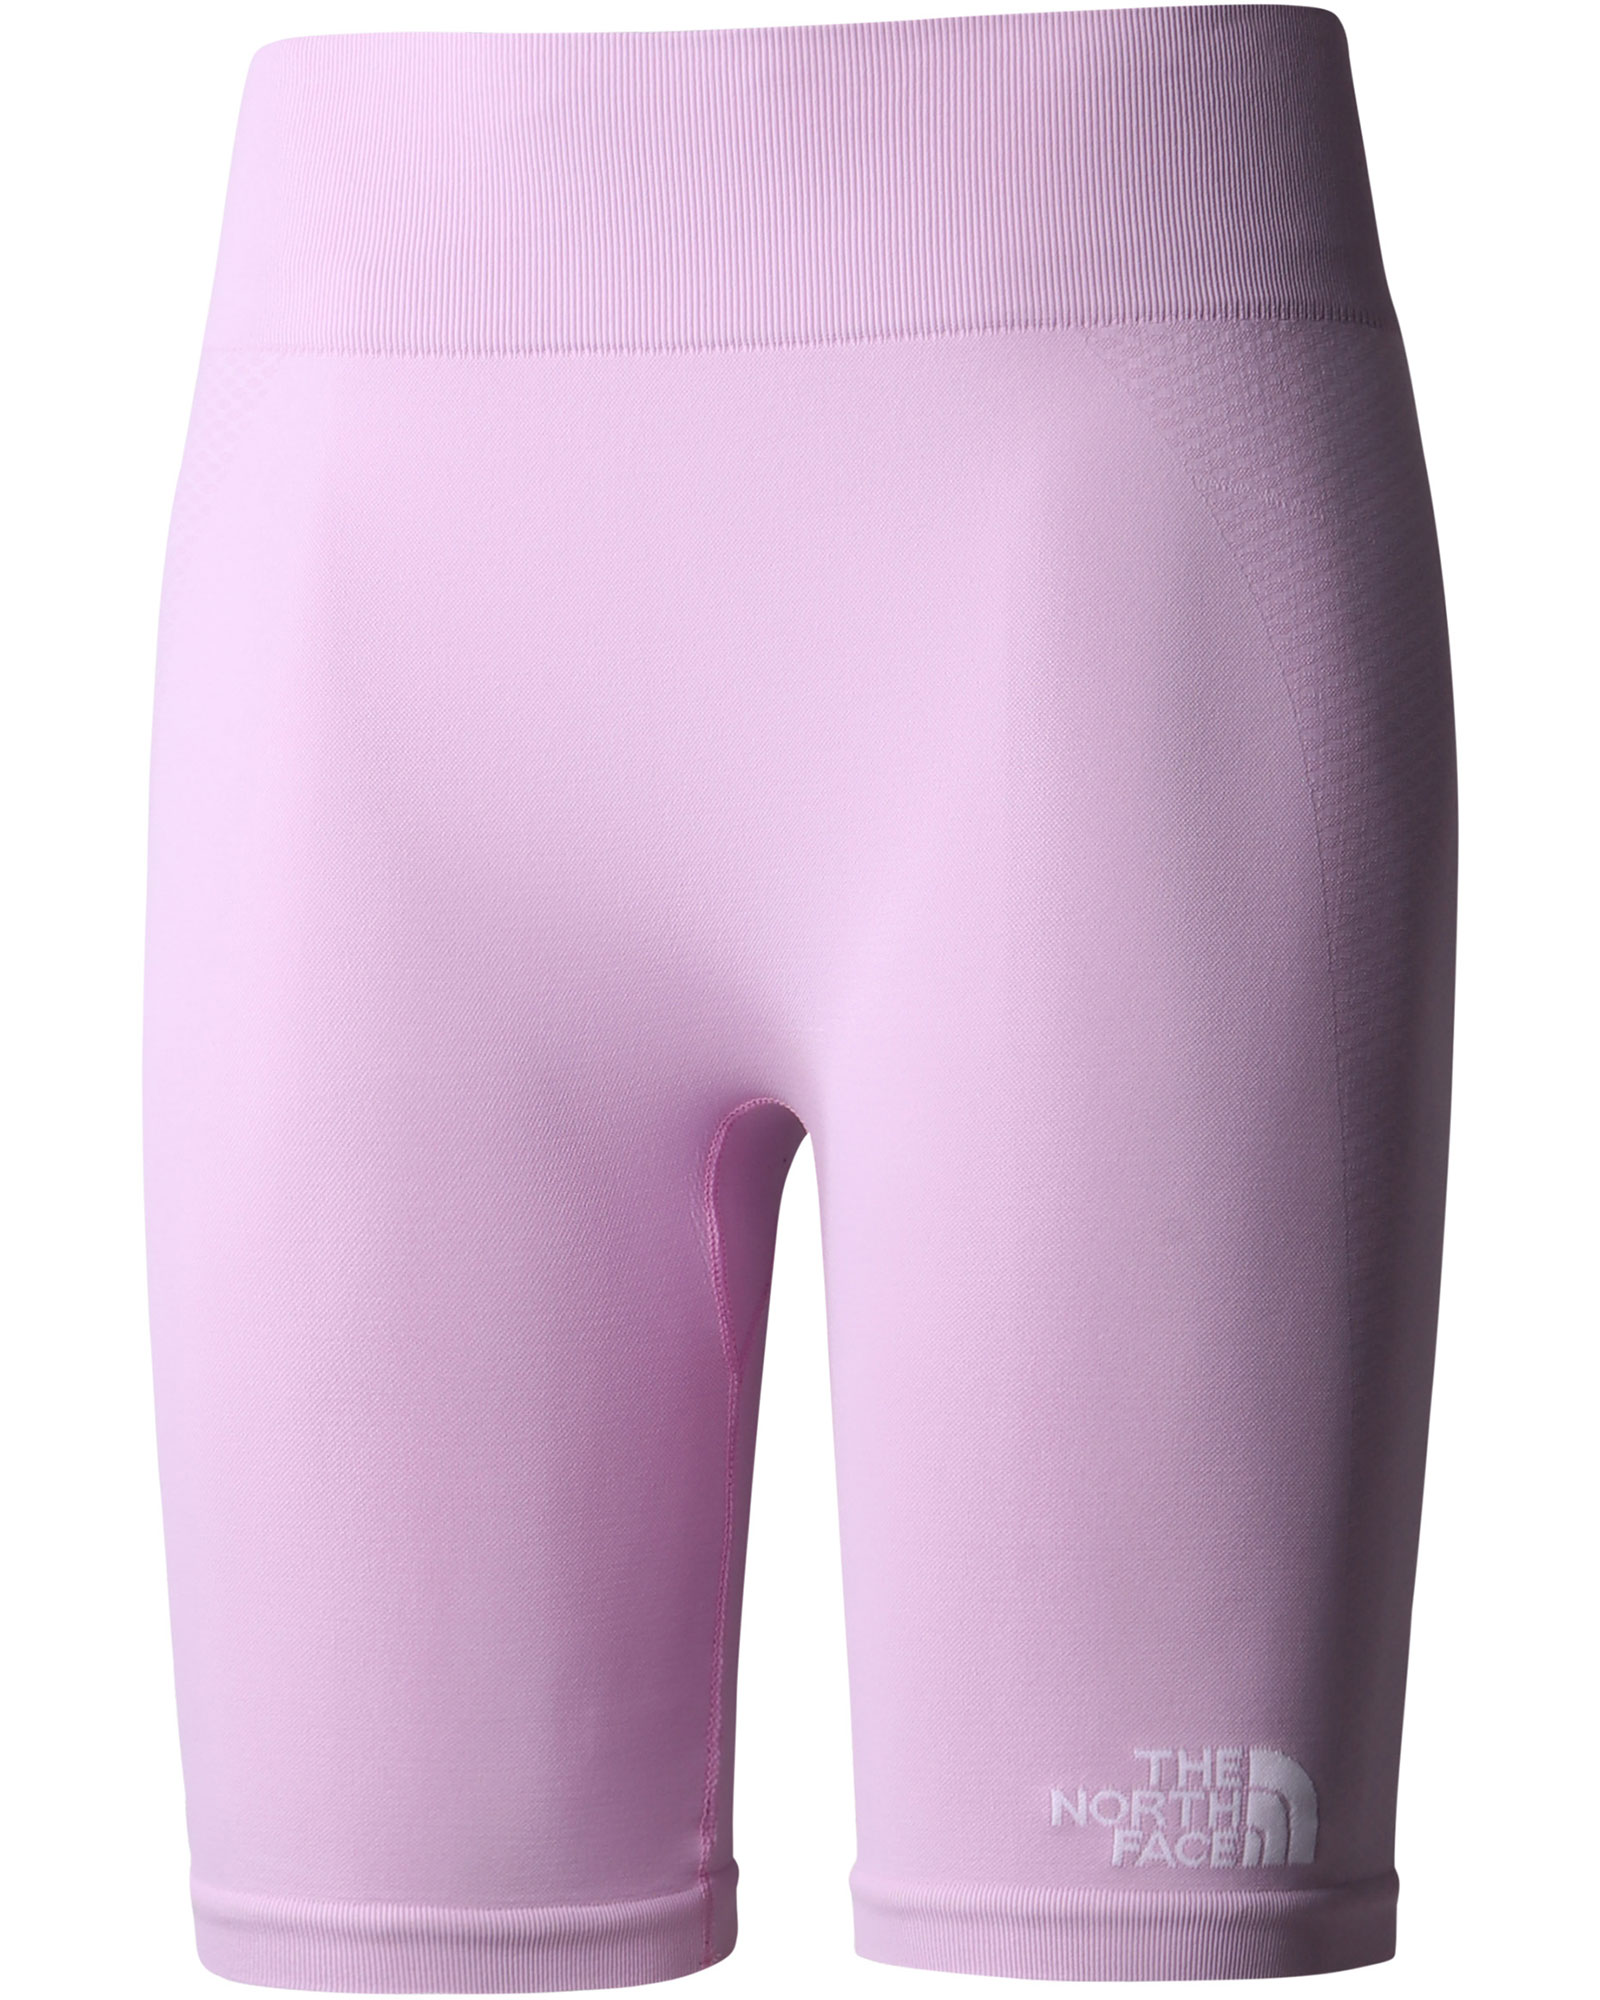 The North Face Women’s Seamless Shorts - Lupine L/XL